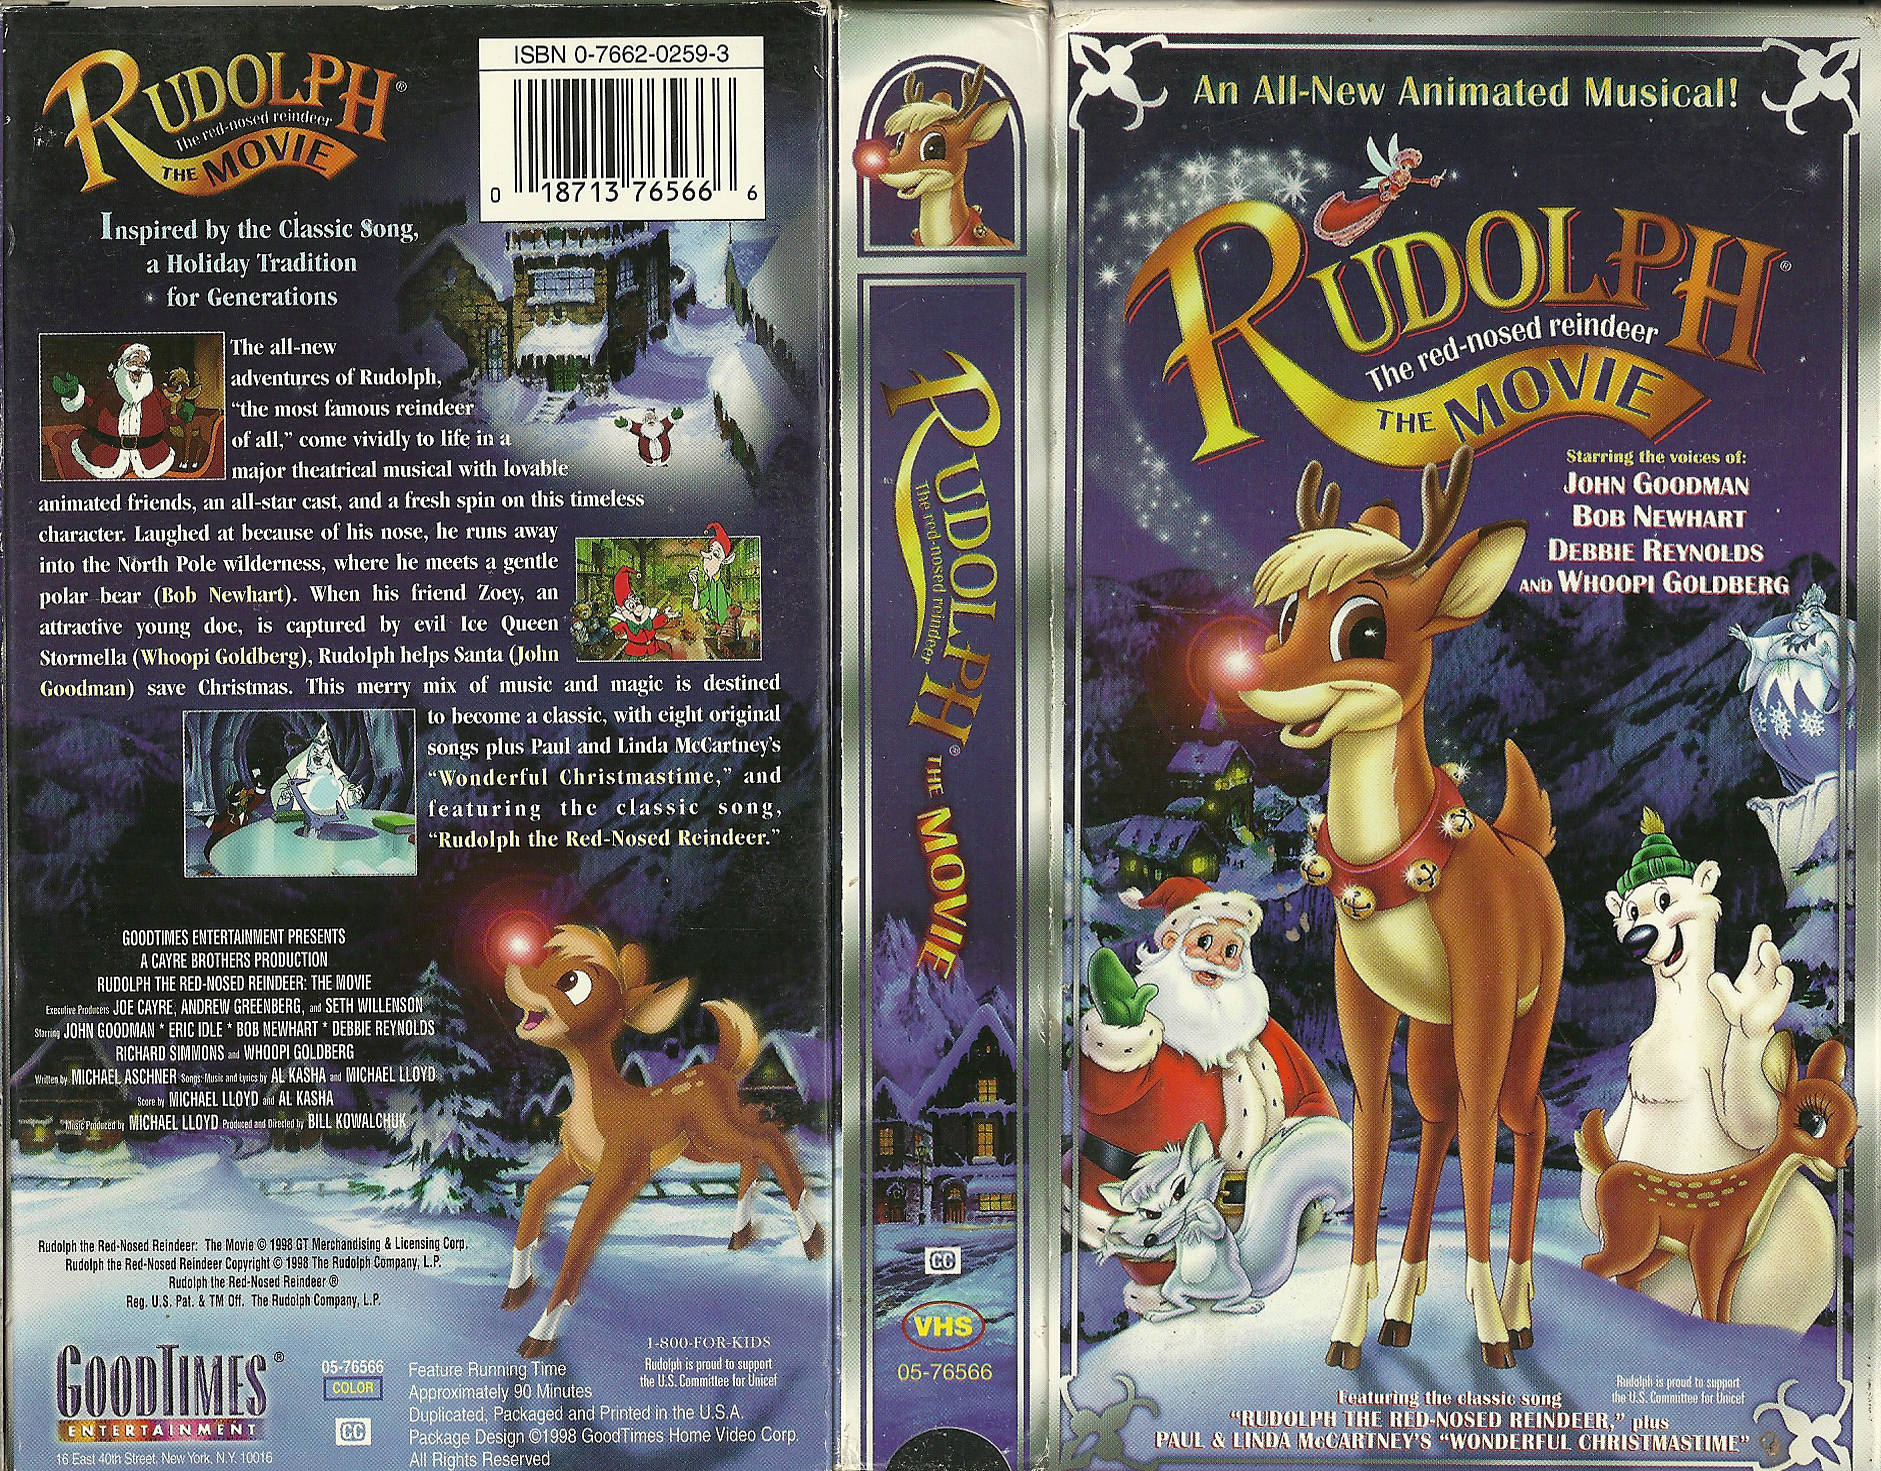 High Resolution Wallpaper | Rudolph The Red-Nosed Reindeer: The Movie 1881x1471 px